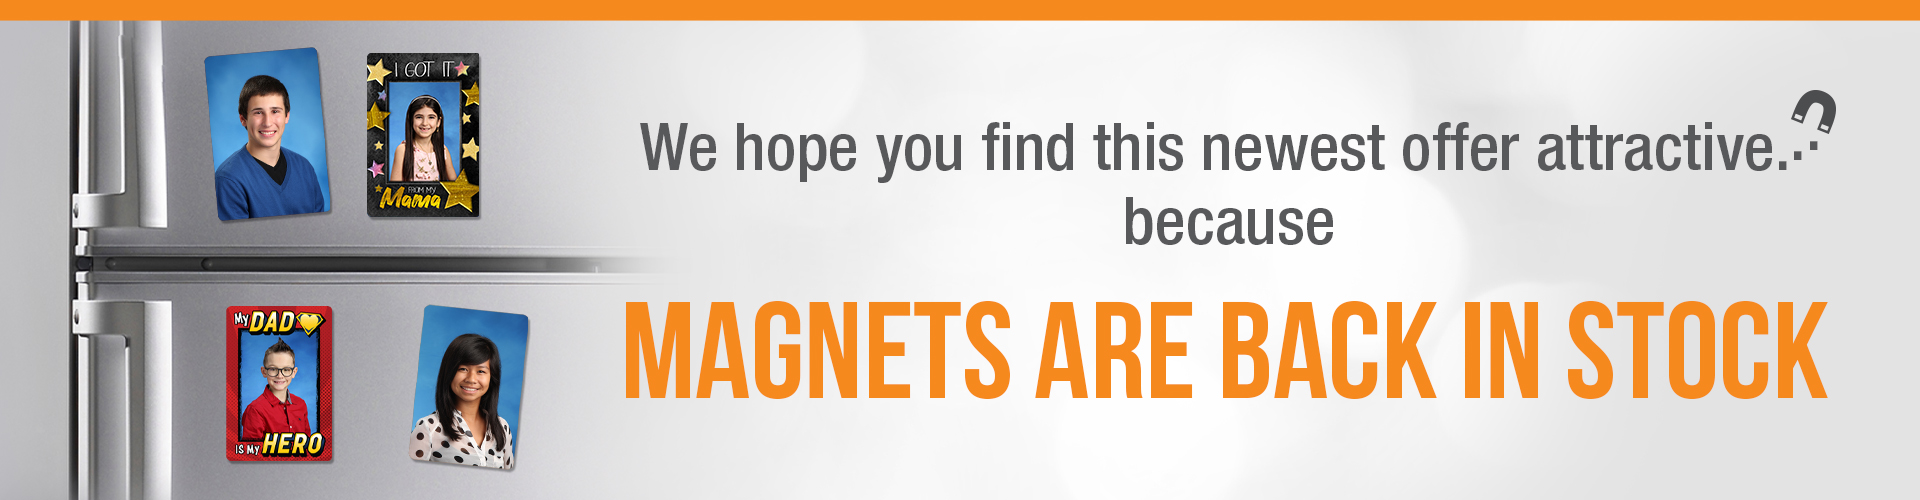 Magnets Are Back  1920x500